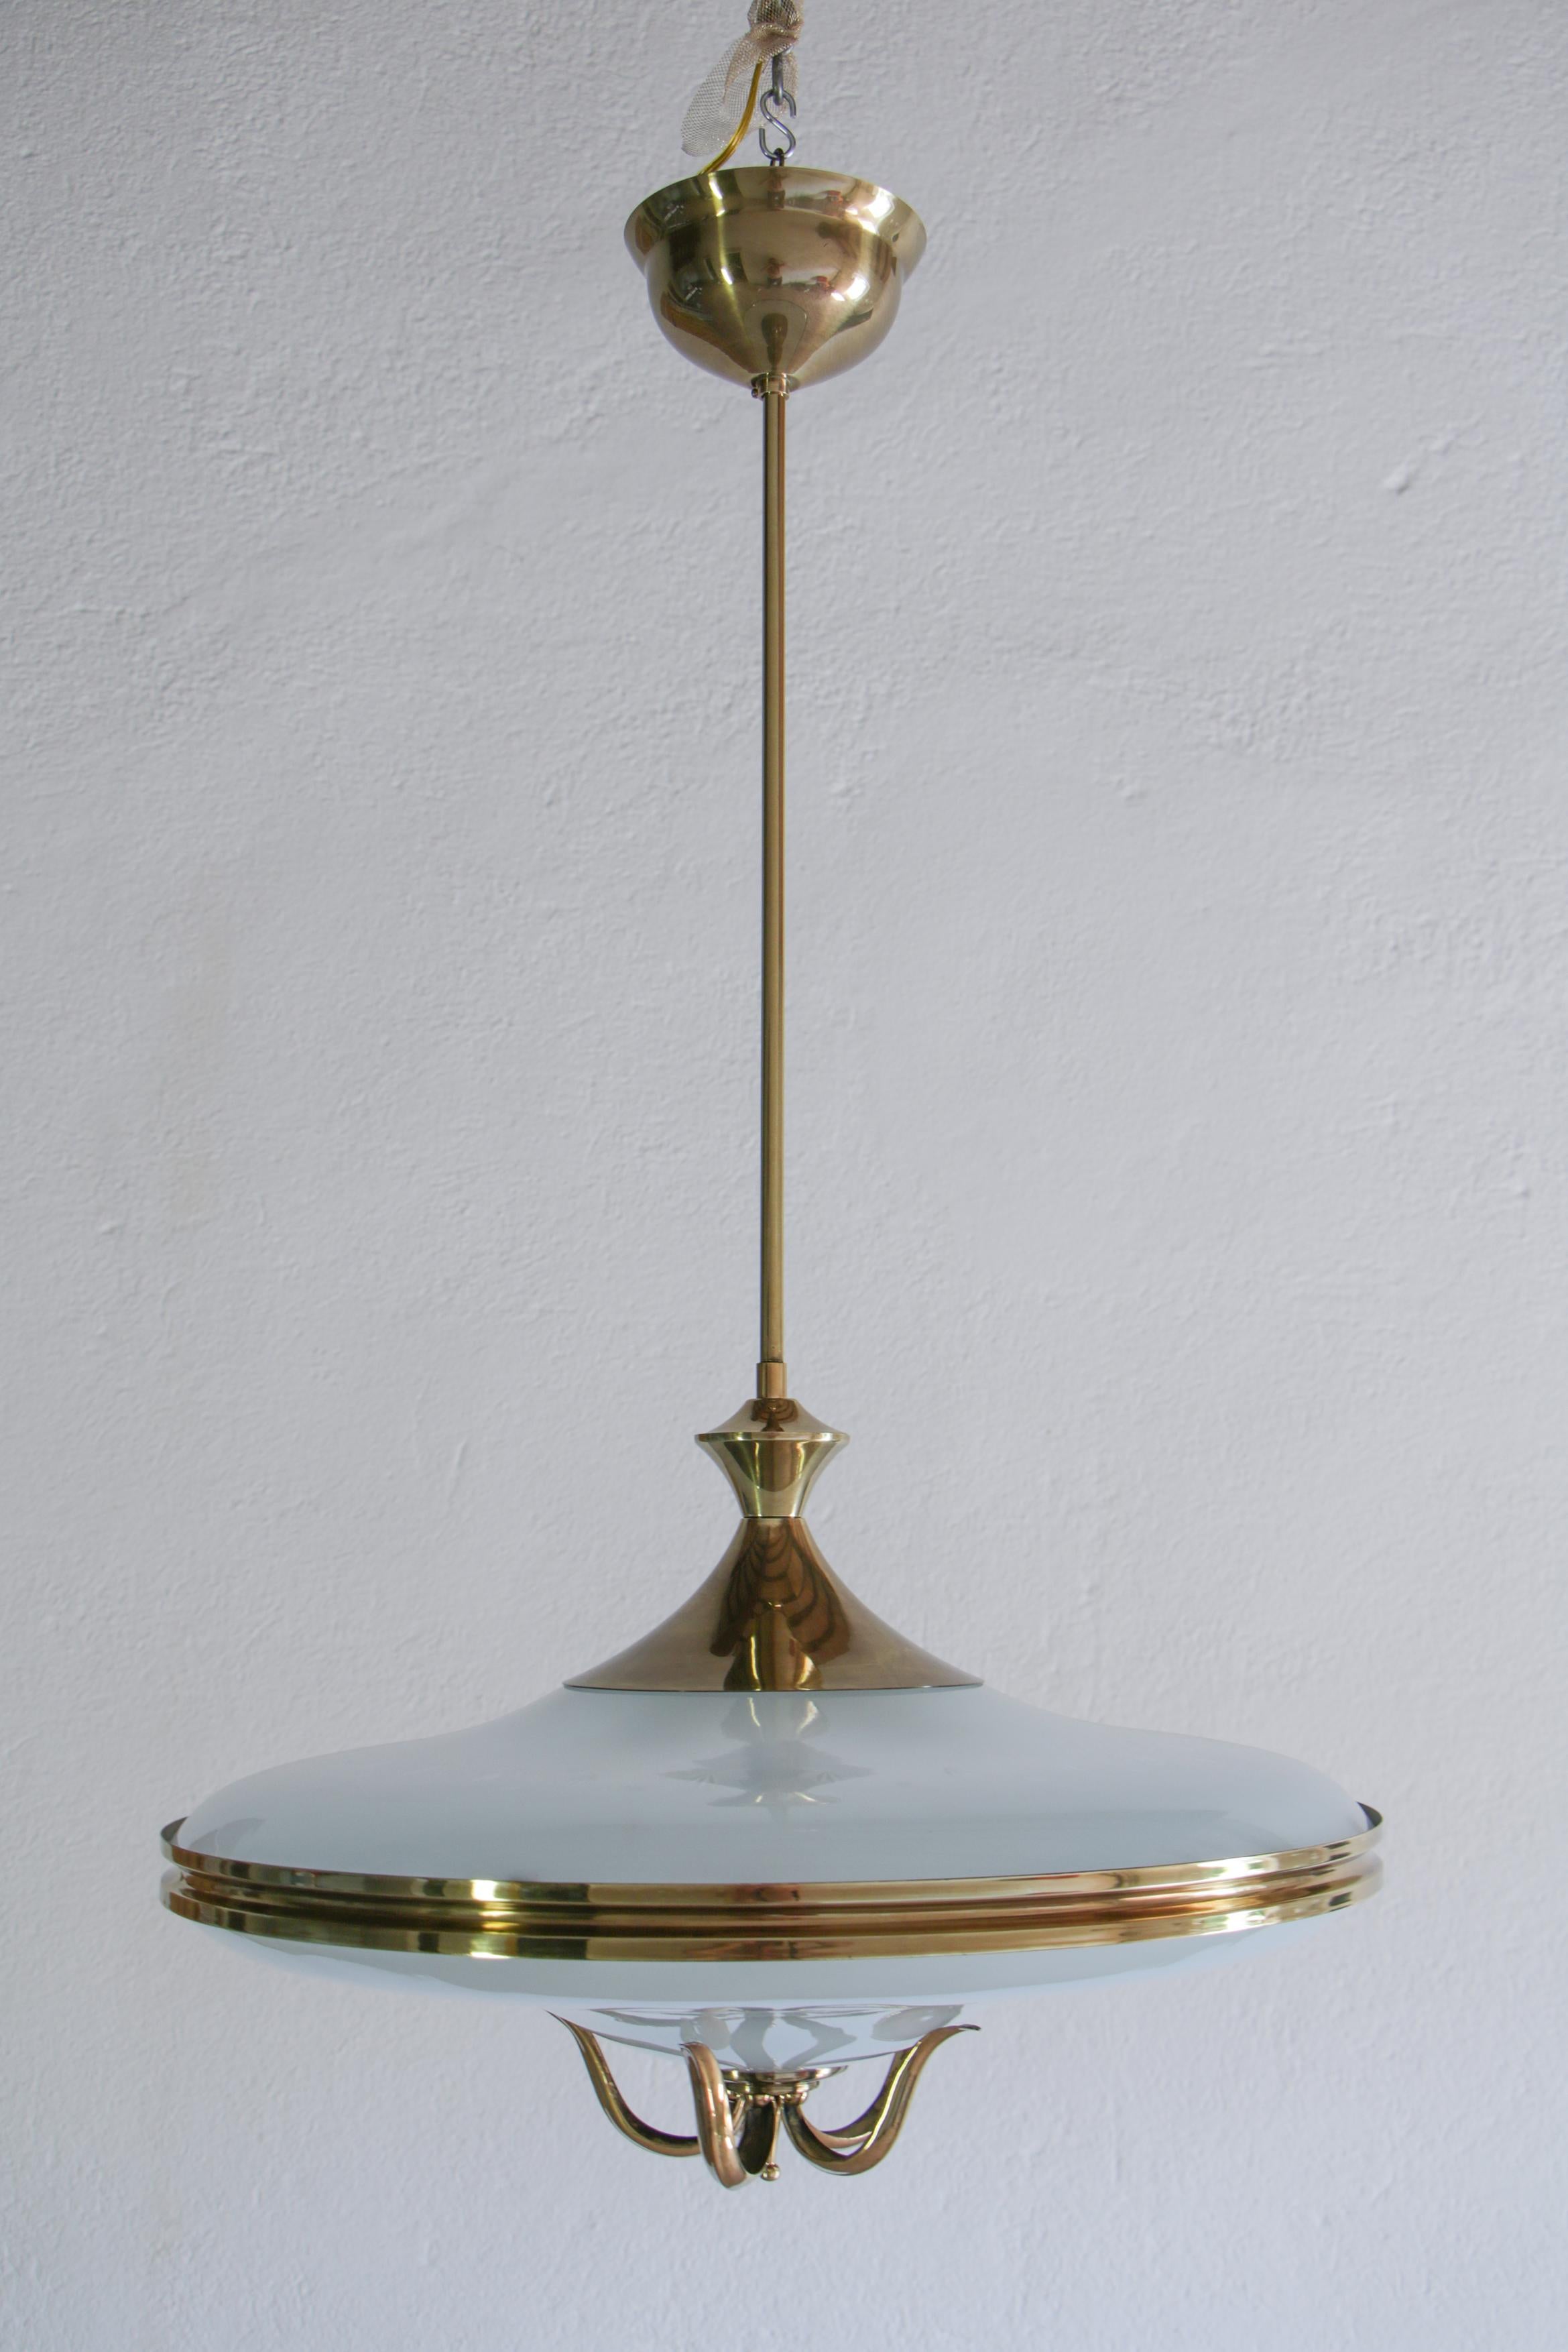 Superb Italian Mid-Century Modern chandelier attributed to Pietro Chiesa, produced in the 1950s. Structure made of polished brass, frosted, and ground glass. It characterized the glass disk elegance by prestigious brass decoration. A specialized